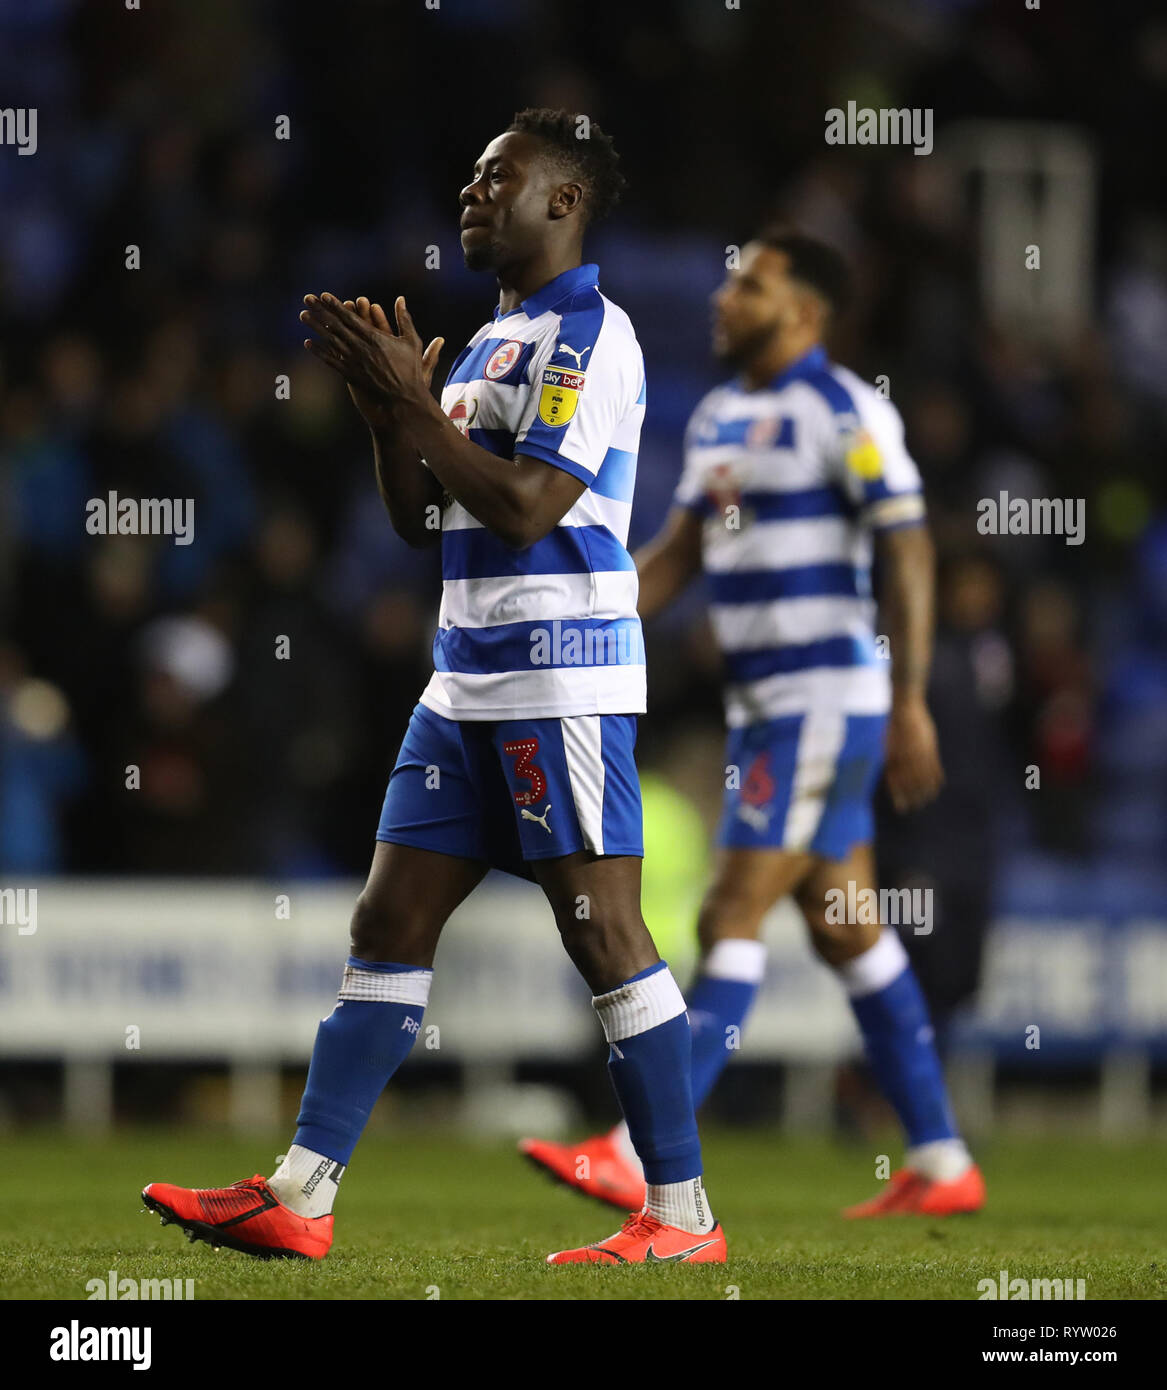 Reading's Andy Yiadom applauds the fans after the Sky Bet Championship match at the Madejski Stadium, Reading. PRESS ASSOCIATION Photo. Picture date: Tuesday March 12, 2019. See PA story SOCCER Reading. Photo credit should read: Bradley Collyer/PA Wire. RESTRICTIONS: No use with unauthorised audio, video, data, fixture lists, club/league logos or 'live' services. Online in-match use limited to 120 images, no video emulation. No use in betting, games or single club/league/player publications. Stock Photo